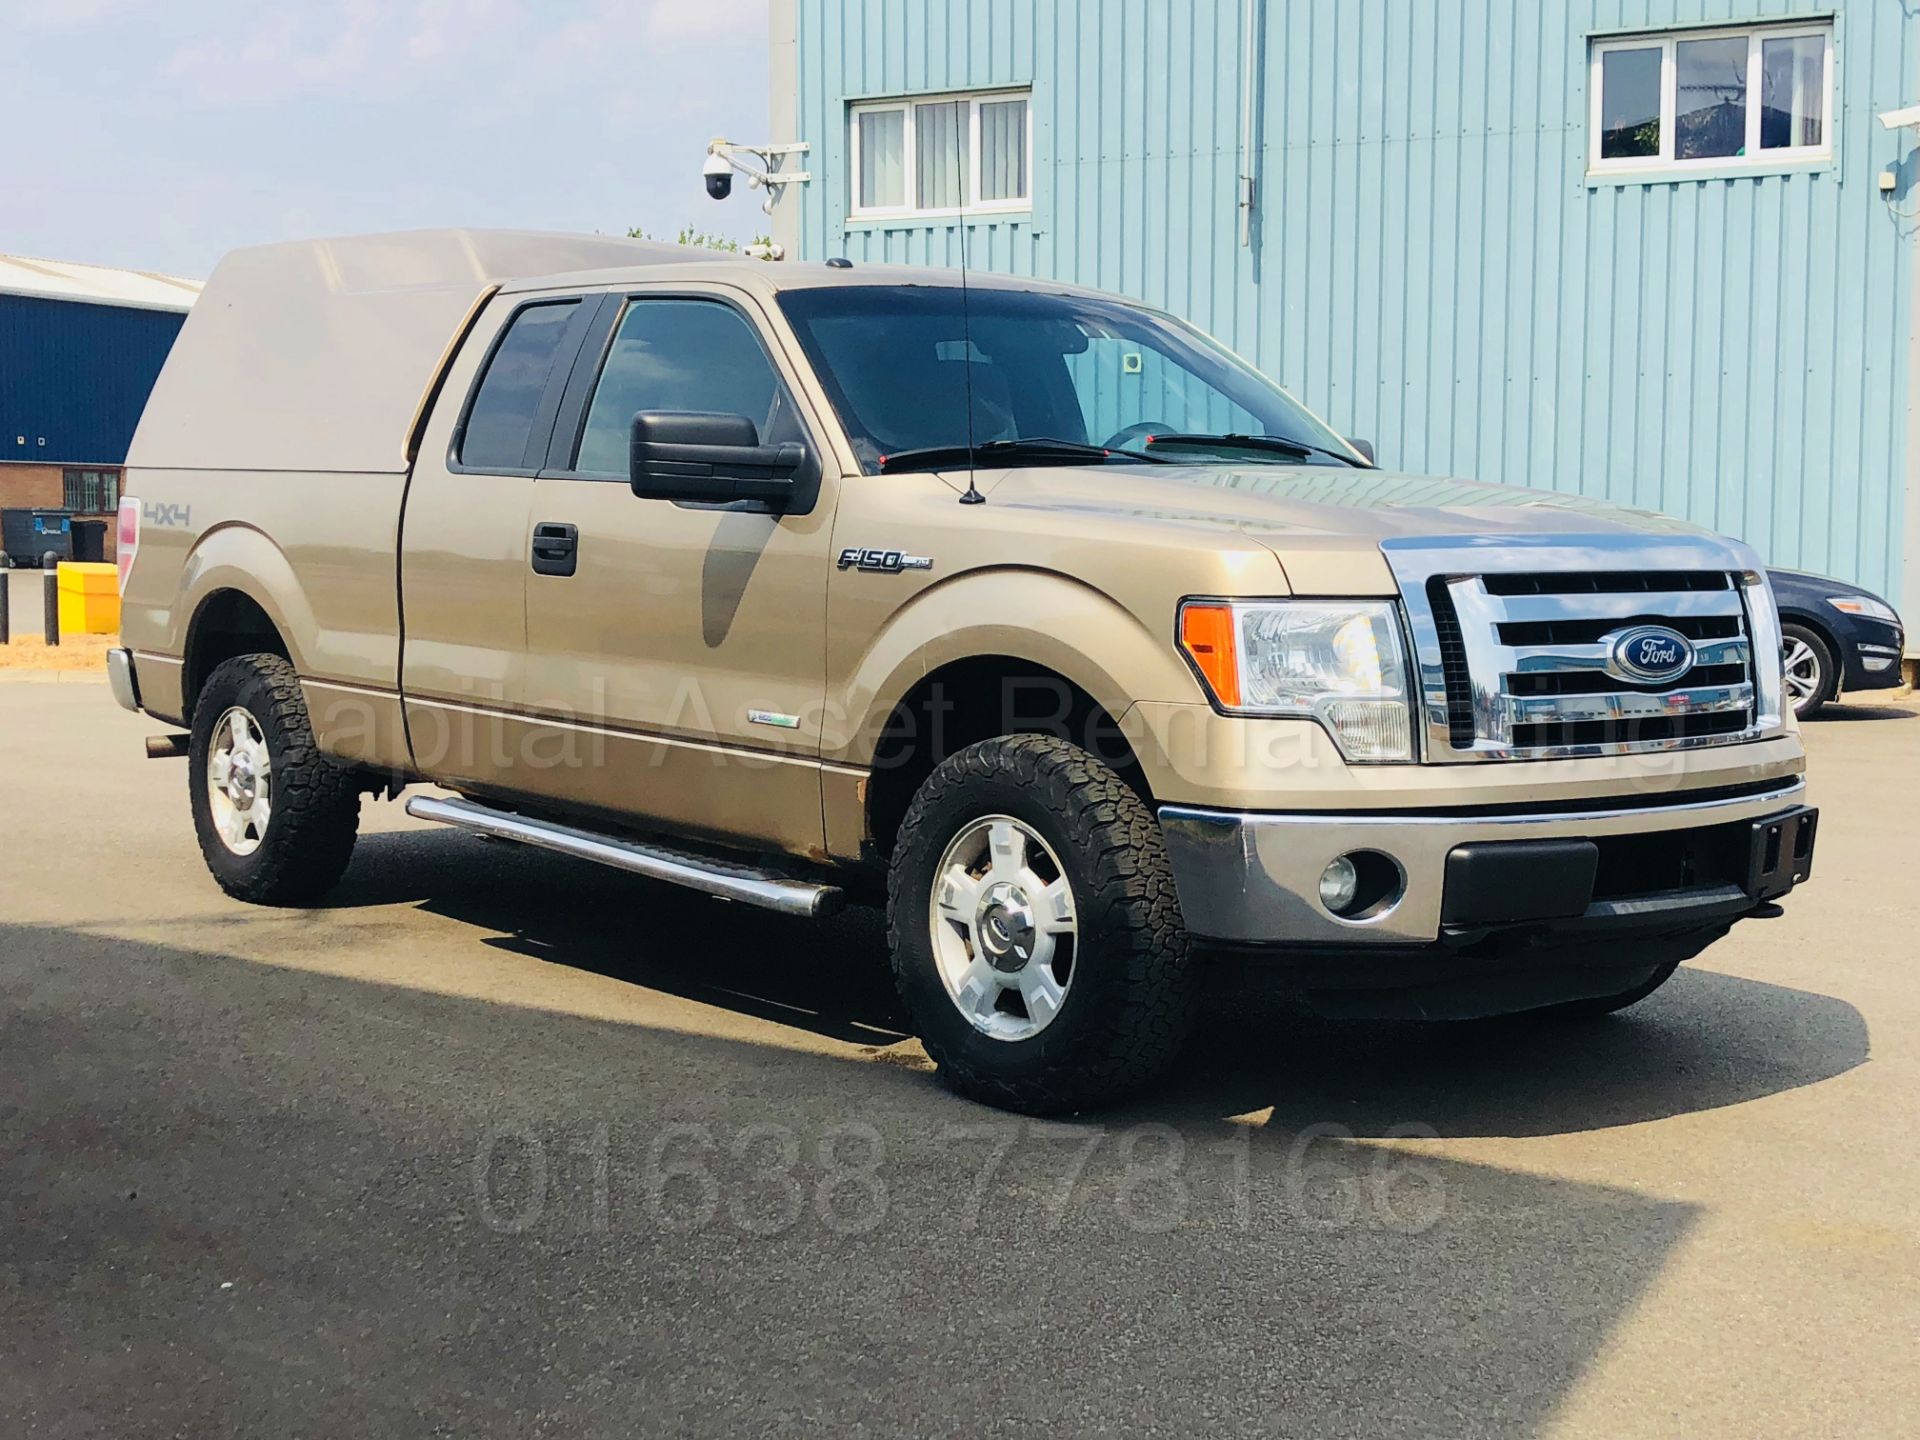 (On Sale) FORD F-150 5.4 V8 XLT EDITION KING-CAB (2012) MODEL**4X4**6 SEATER**AUTOMATIC *TOP SPEC* - Image 6 of 52